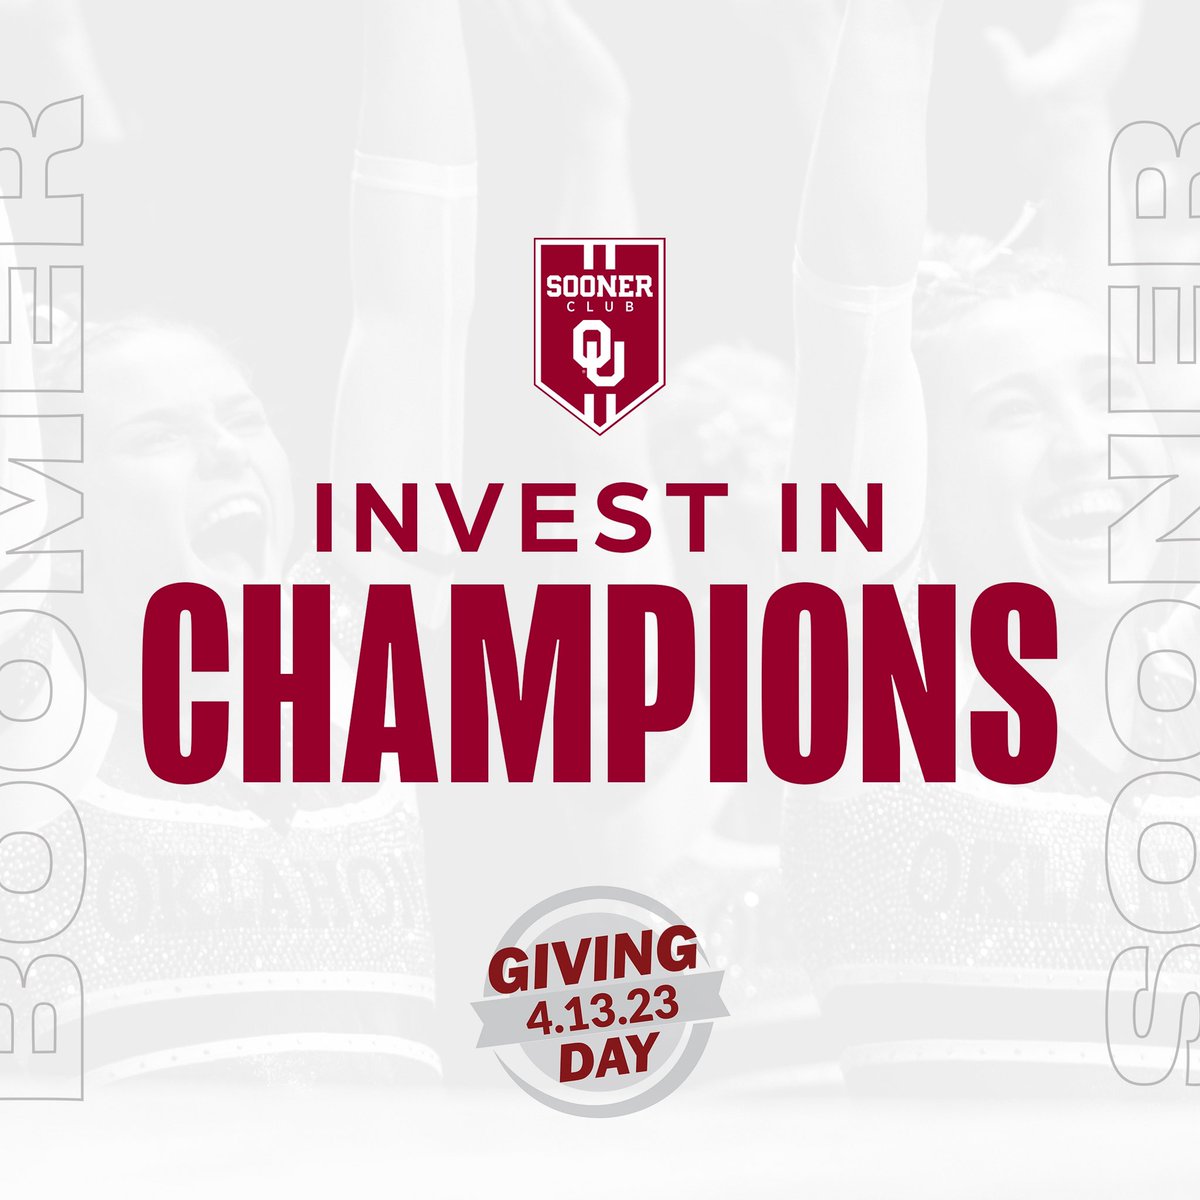 𝐈𝐦𝐩𝐚𝐜𝐭𝐟𝐮𝐥 👏

A huge thank you to Michael Wilson for his $1 million investment in the Sam Viersen Gym Center.

Join Wilson and #InvestInChampions on #OUGivingDay by making a gift to improve our training facility.

🏆 bit.ly/GivingDay23OU
📝 bit.ly/3o9f5nK